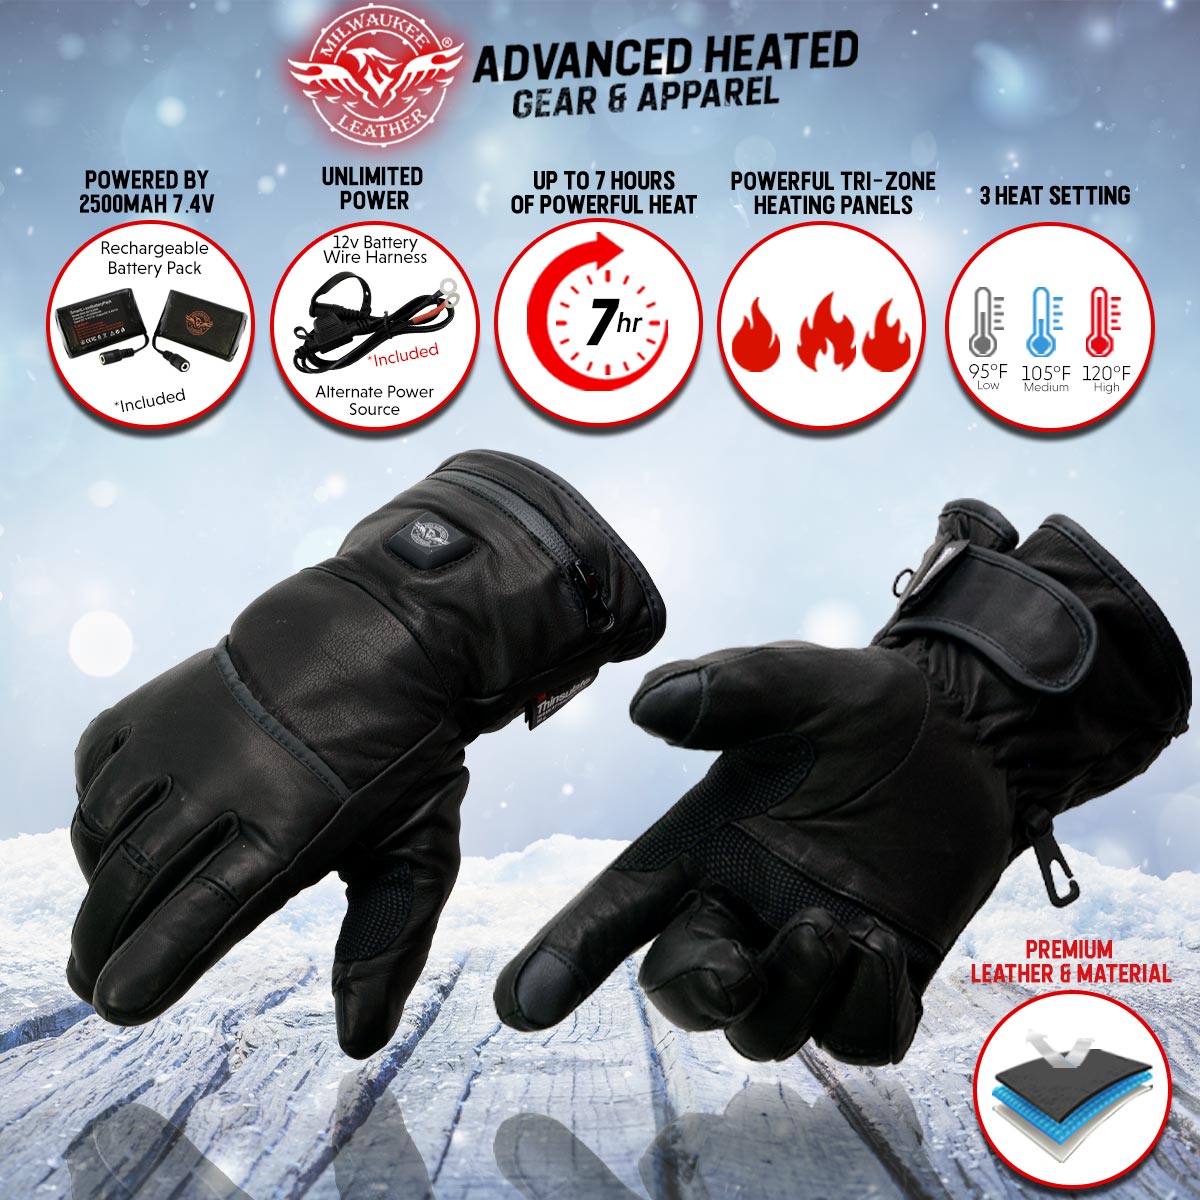  Volt Heated Leather Work Gloves - Rechargeable Battery Heated Working  Gloves for Men - Ideal for Work and Hunting - Durable Heating Men's Gloves  Ensuring Warm Hands in Cold Conditions 